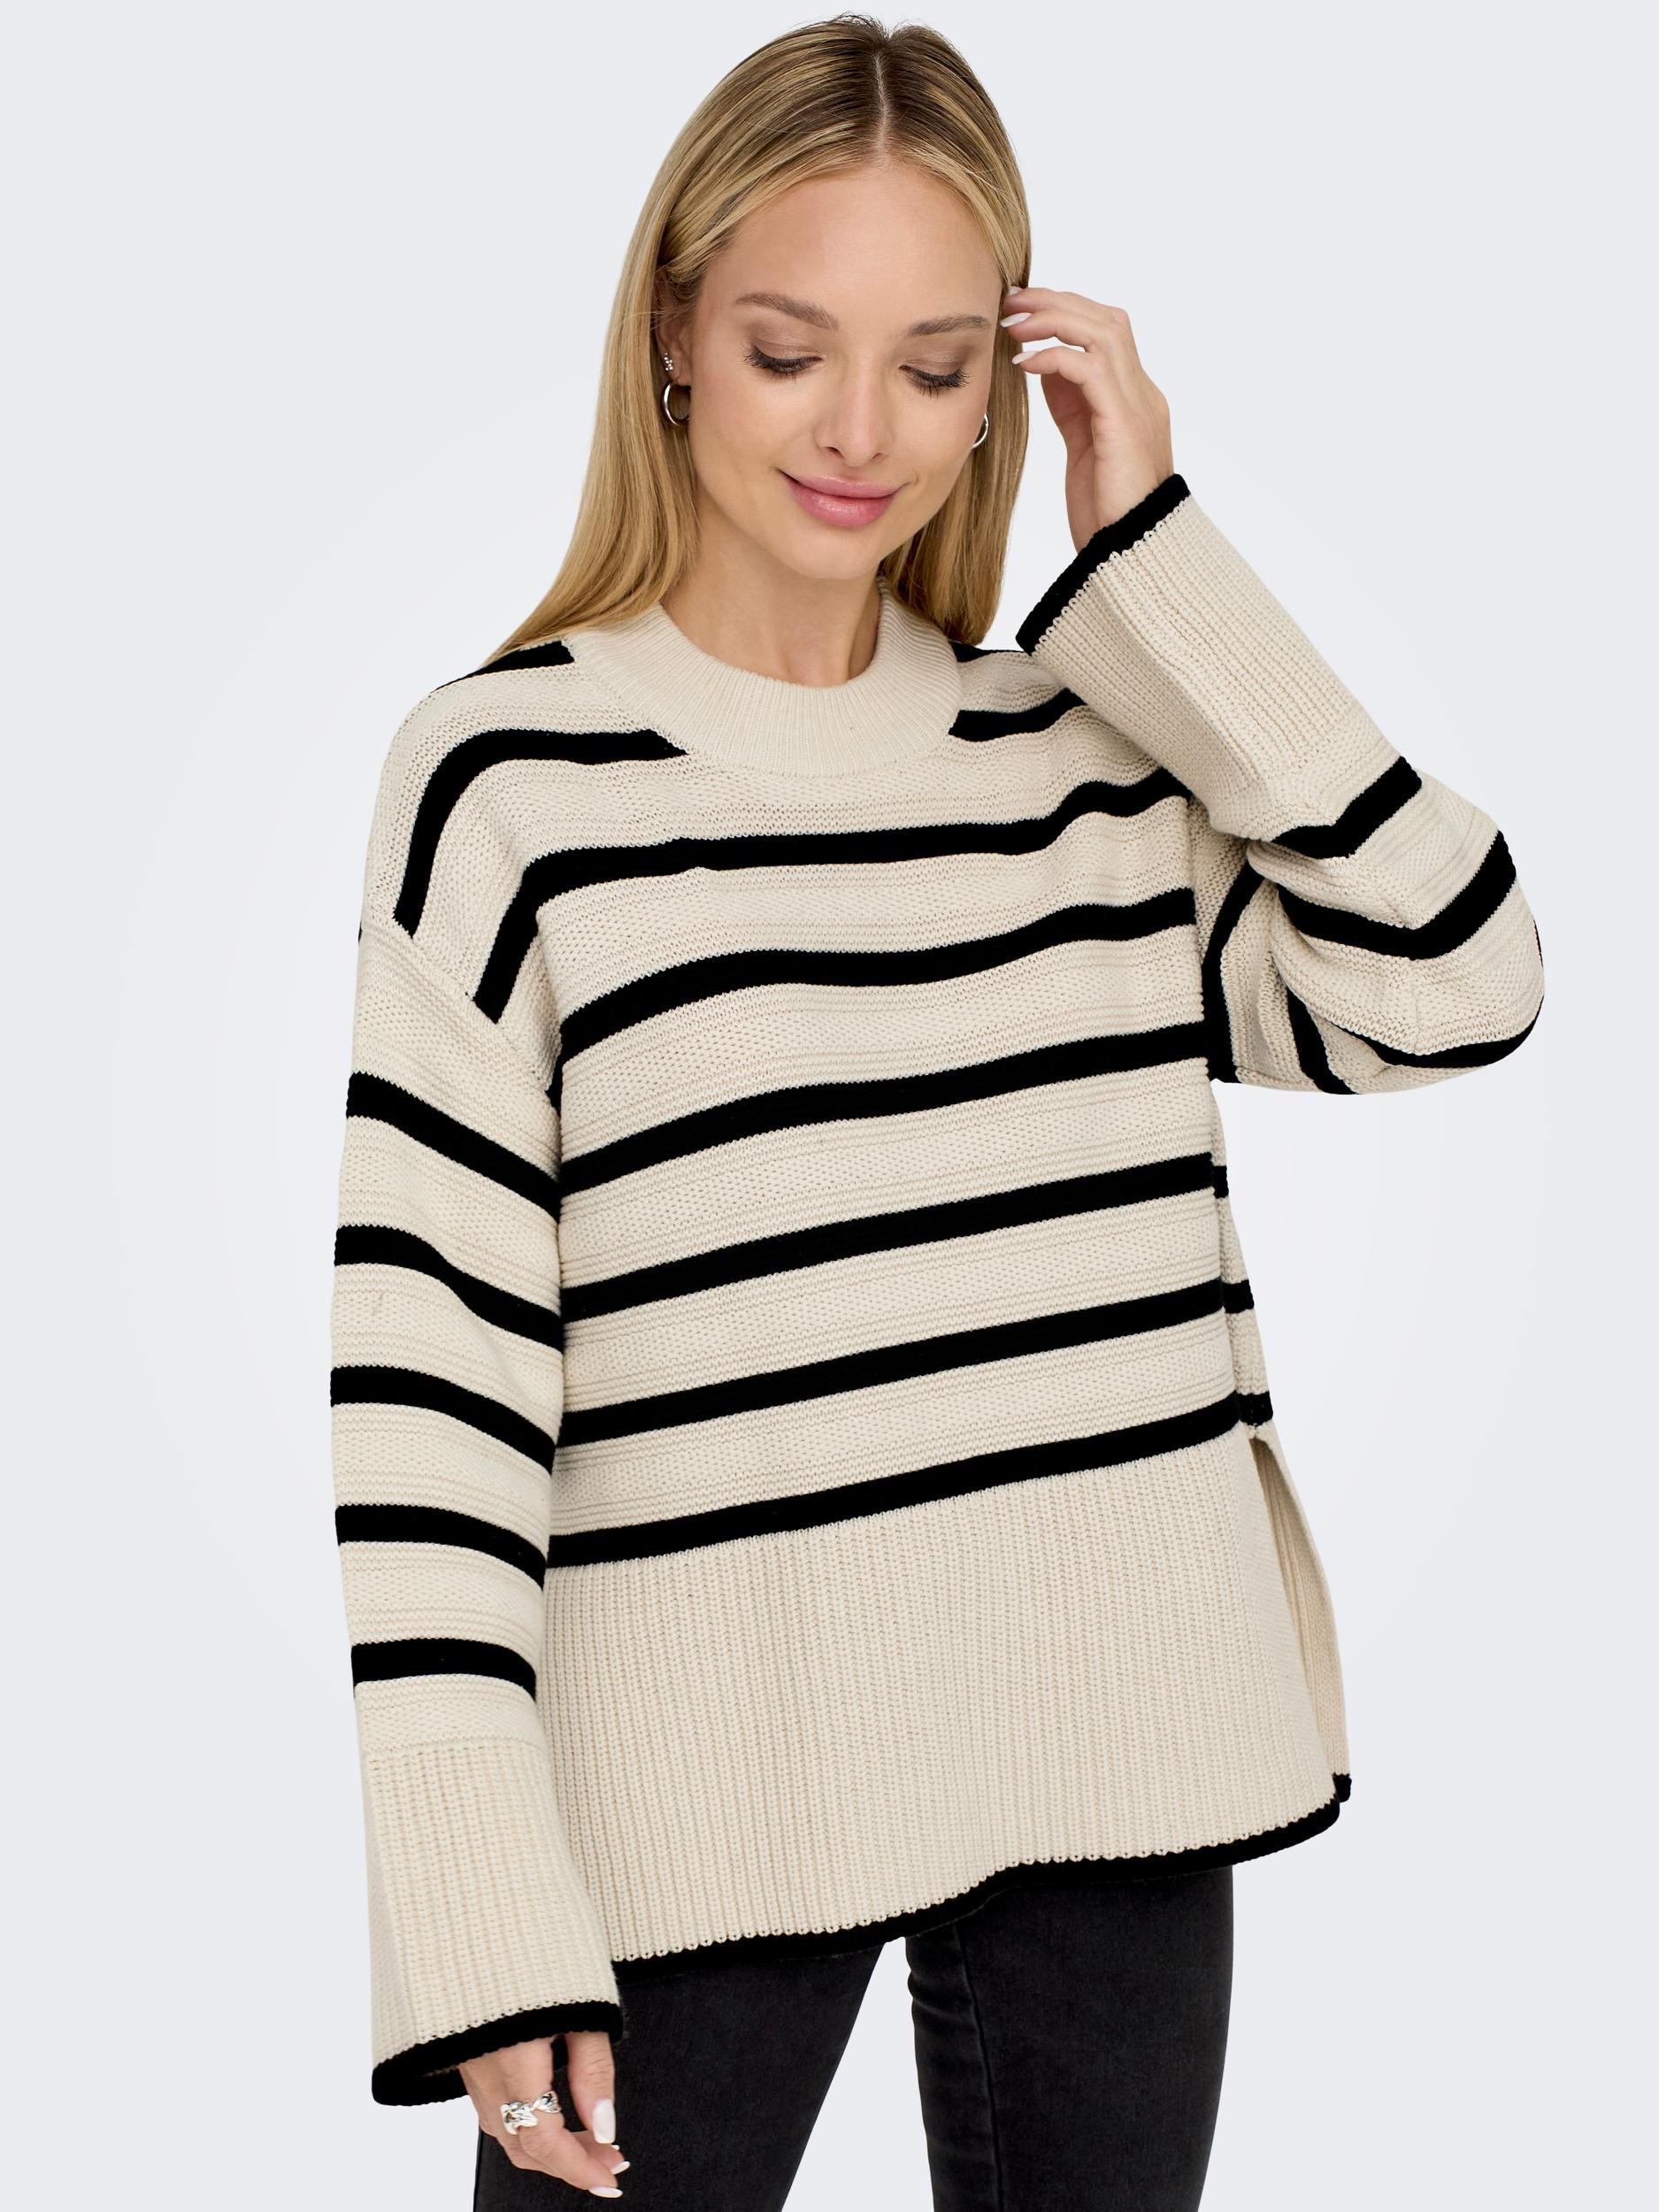 Only - Pullover a righe in misto cotone, Beige, large image number 4